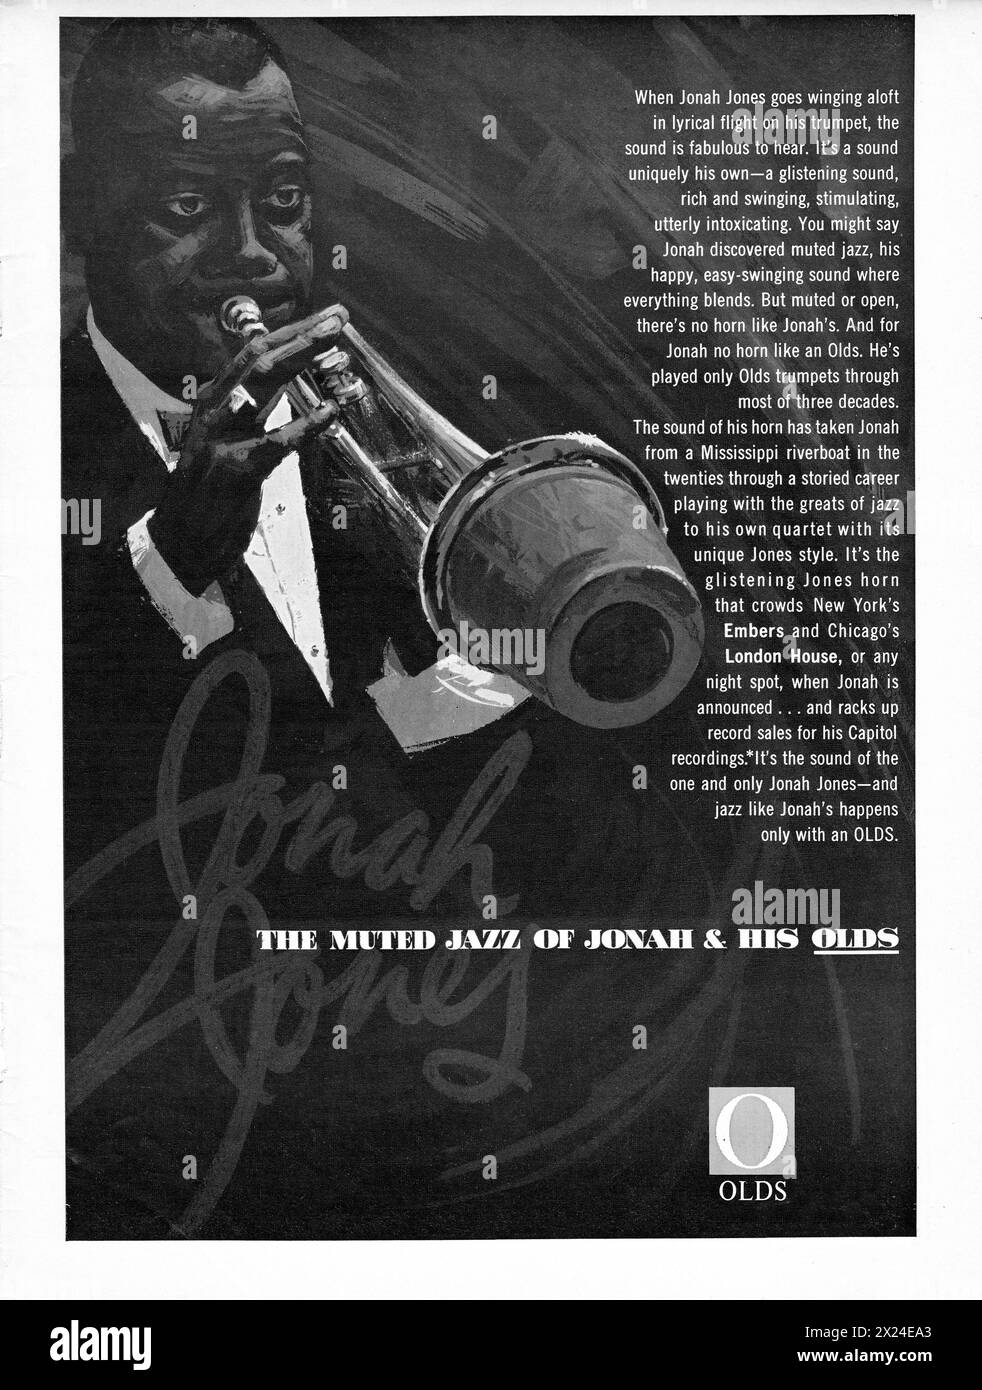 A full page ad for Olds trumpets featuring an endorsement by Jonah Jones and flattering remarks about his great tone both open & muted. Stock Photo